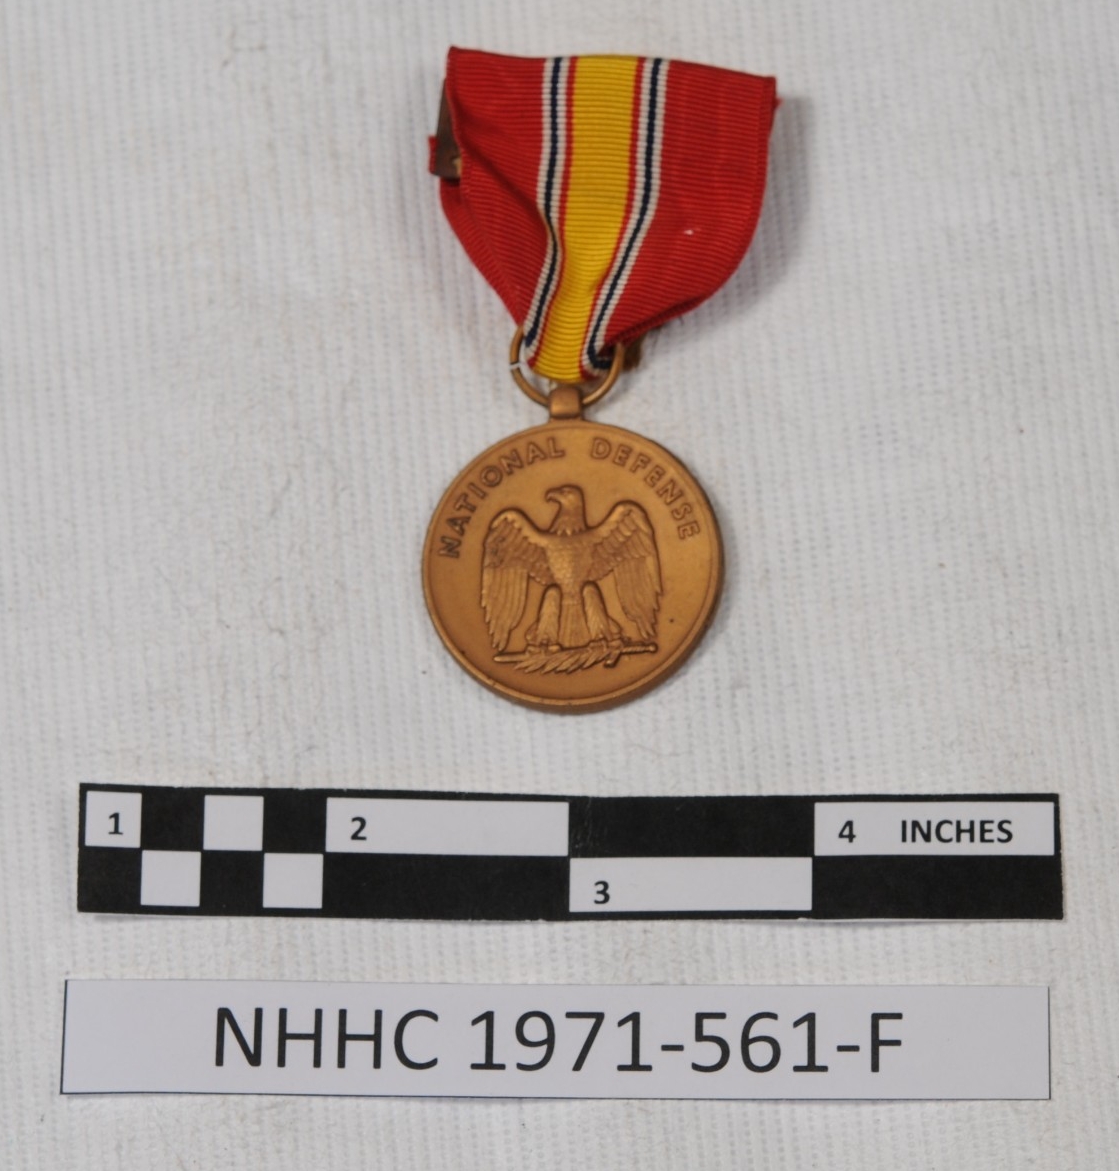 One National Defense Service medal. The ribbon has the following vertical stripe color pattern: wide red, thin white, thin dark blue, thin white, thin red, thicker yellow, thin red, thin white, thin dark blue, thin white, wide red. There is a met...